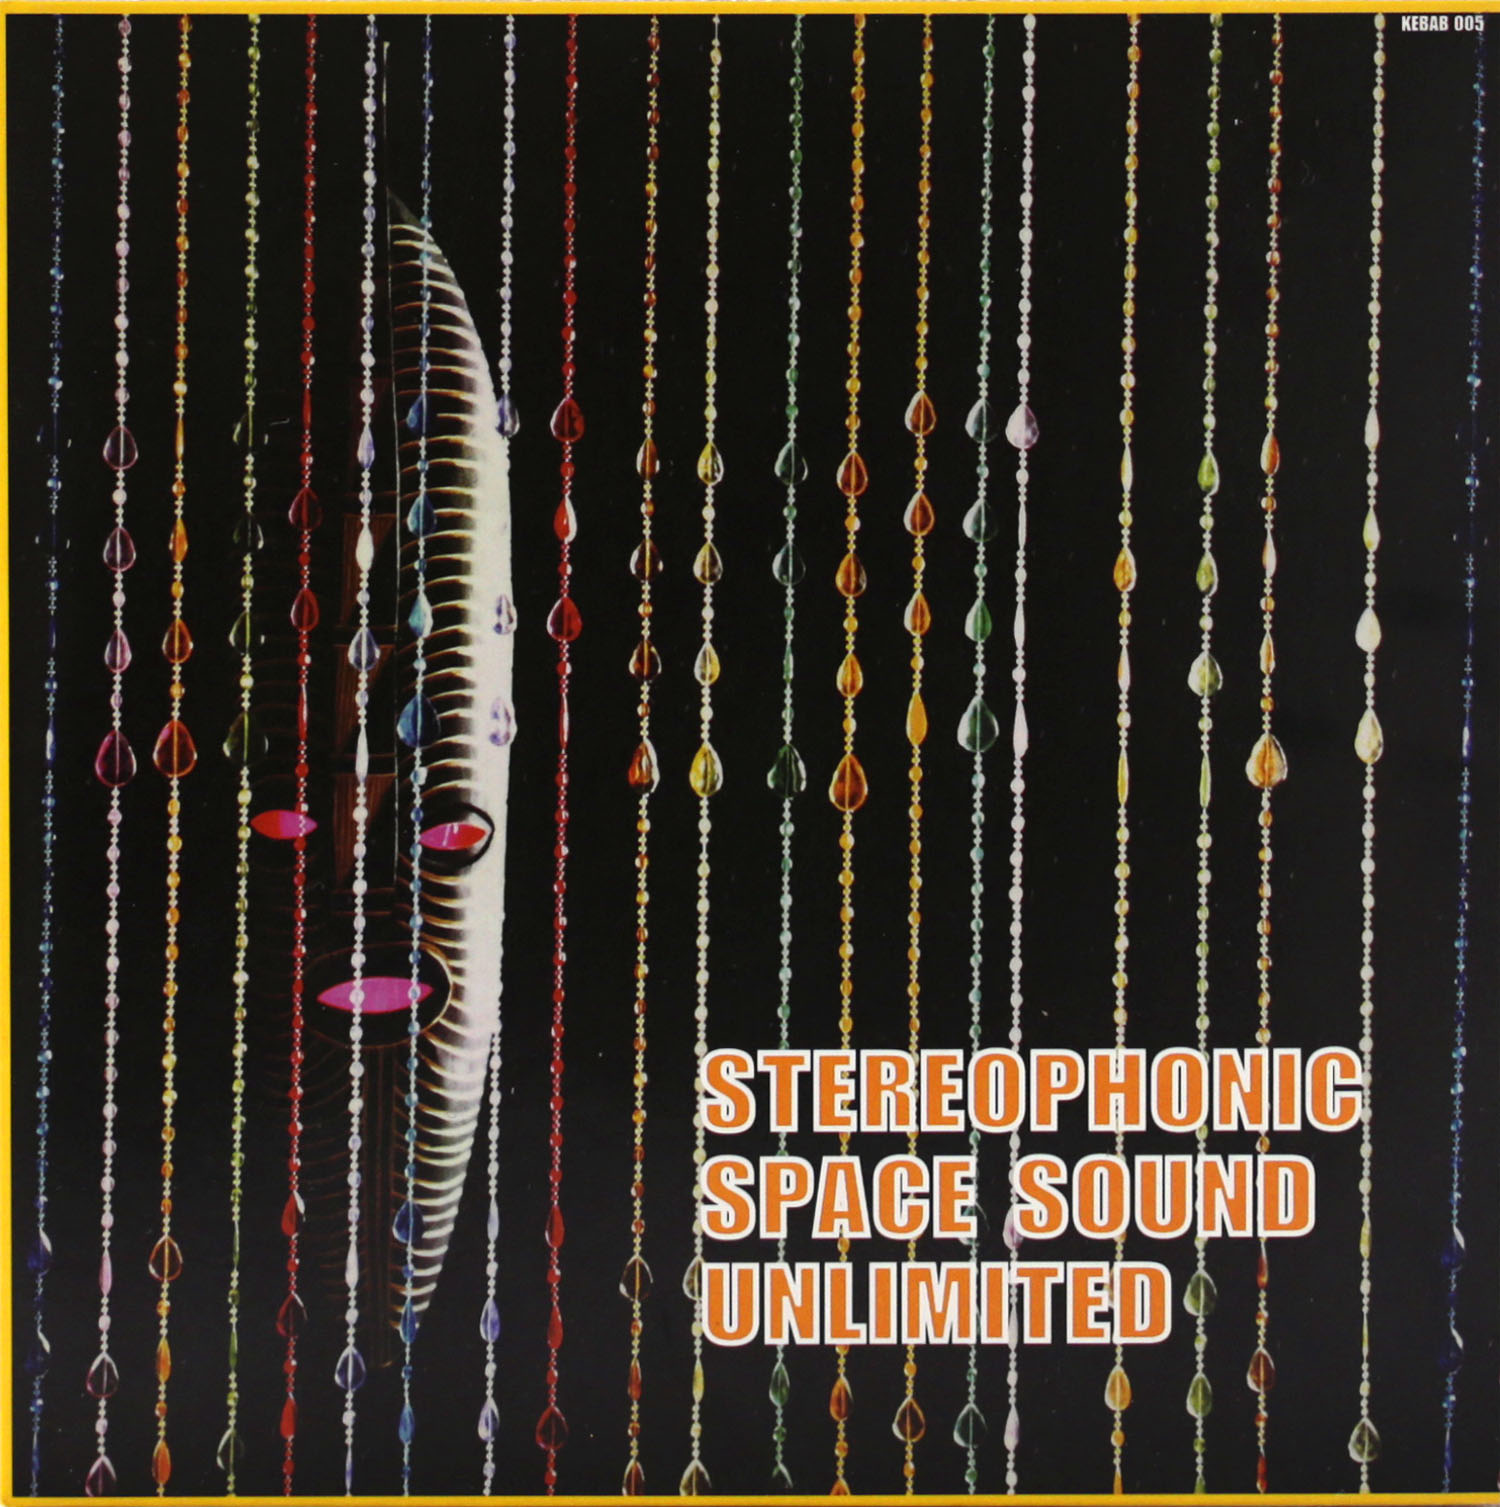  Stereophonic Space Sound Unlimited  Phantom Rider / Spooky Shore 